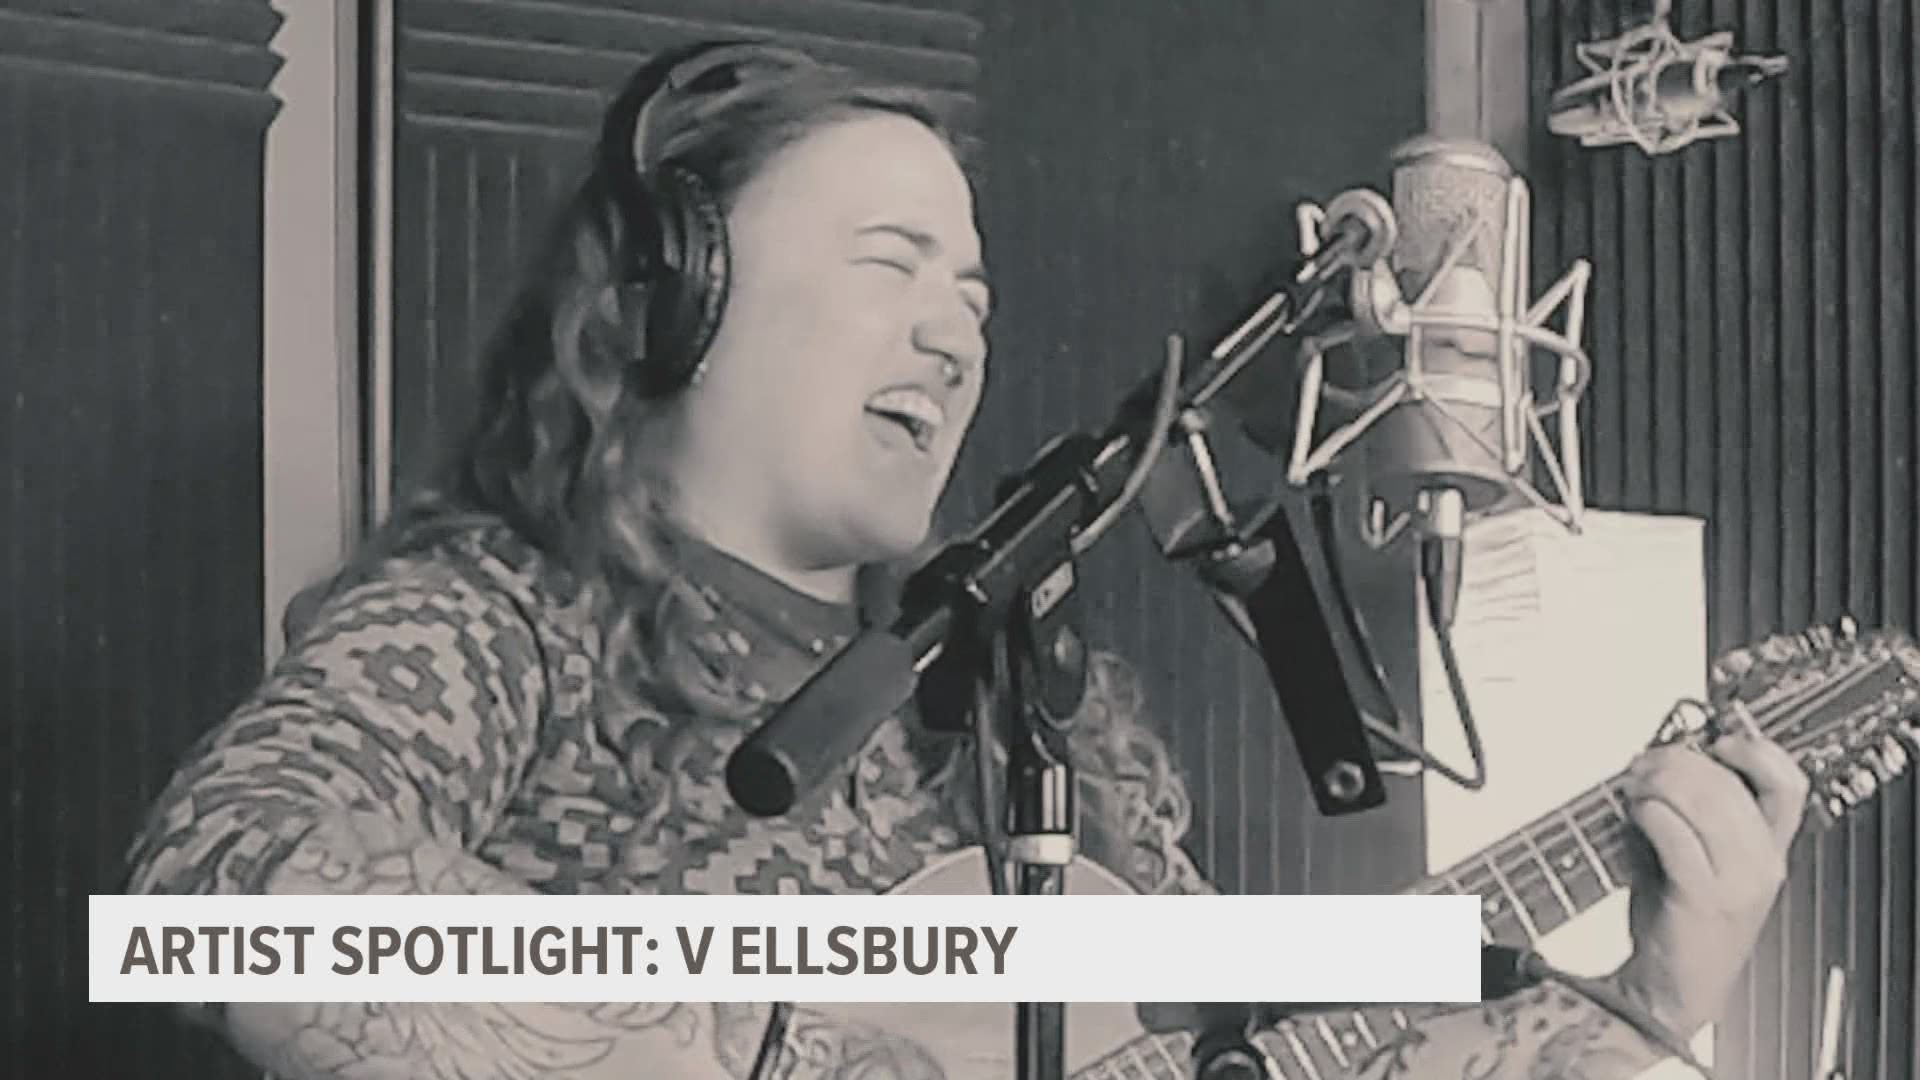 V Ellsbury is a psychedelic blues rocker with a haunting voice. Enjoy her tribute to her father, The Way Back, and hear more of V's work at lionessa.bandcamp.com.